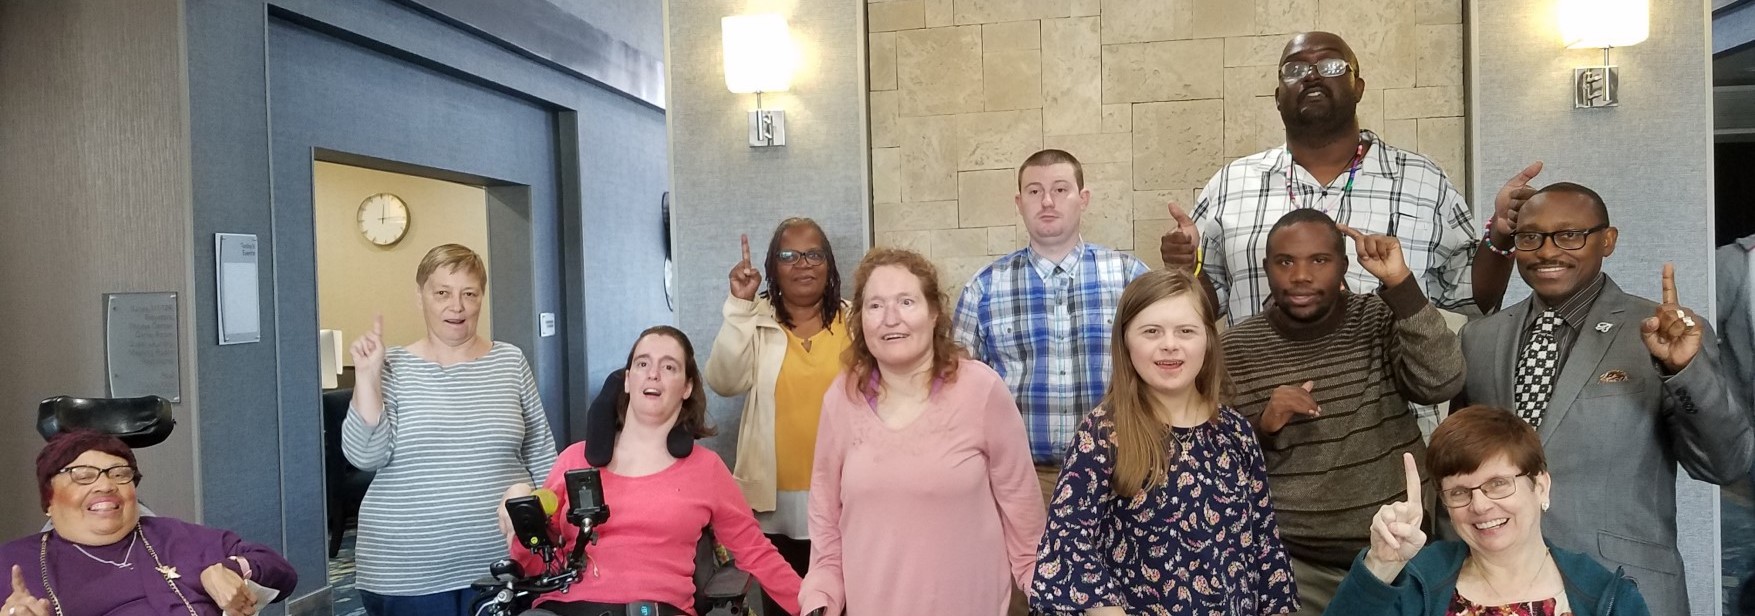 A group of smiling people in a hotel lobby, some standing, others using wheelchairs.